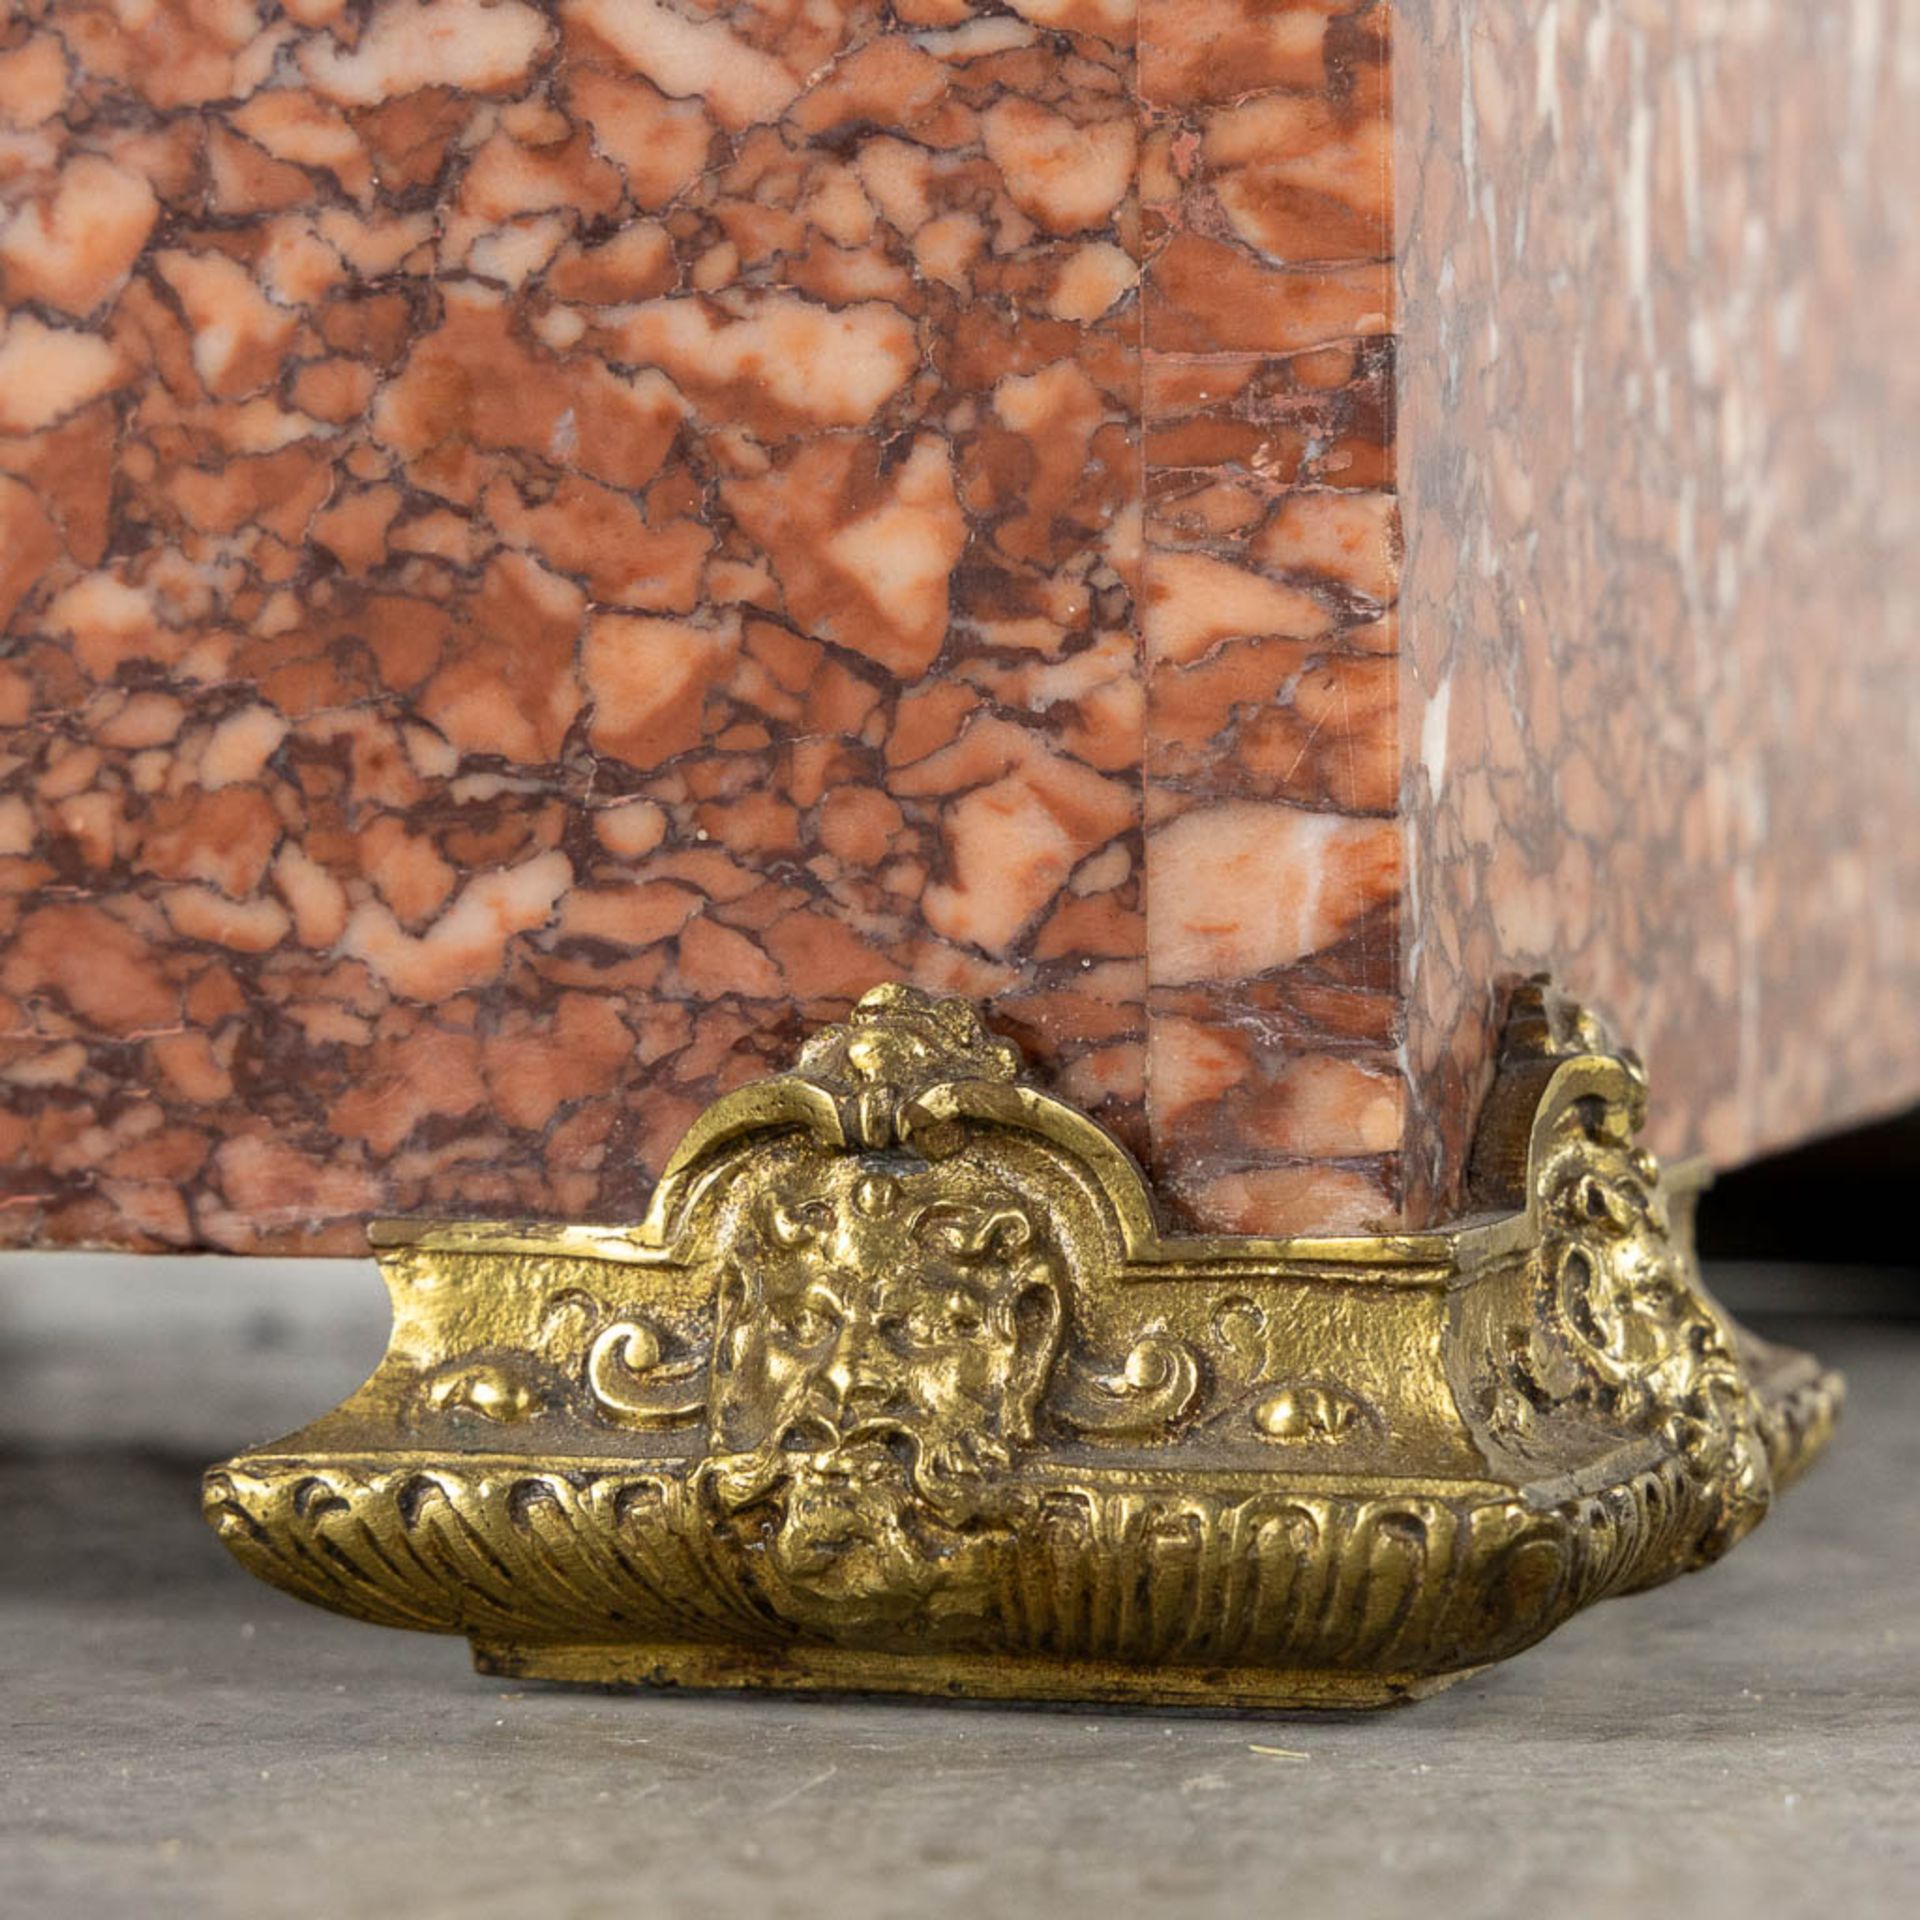 An antique sculptured red marble pedestal, mounted with bronze. Circa 1900. (L:30 x W:30 x H:103 cm) - Image 7 of 7